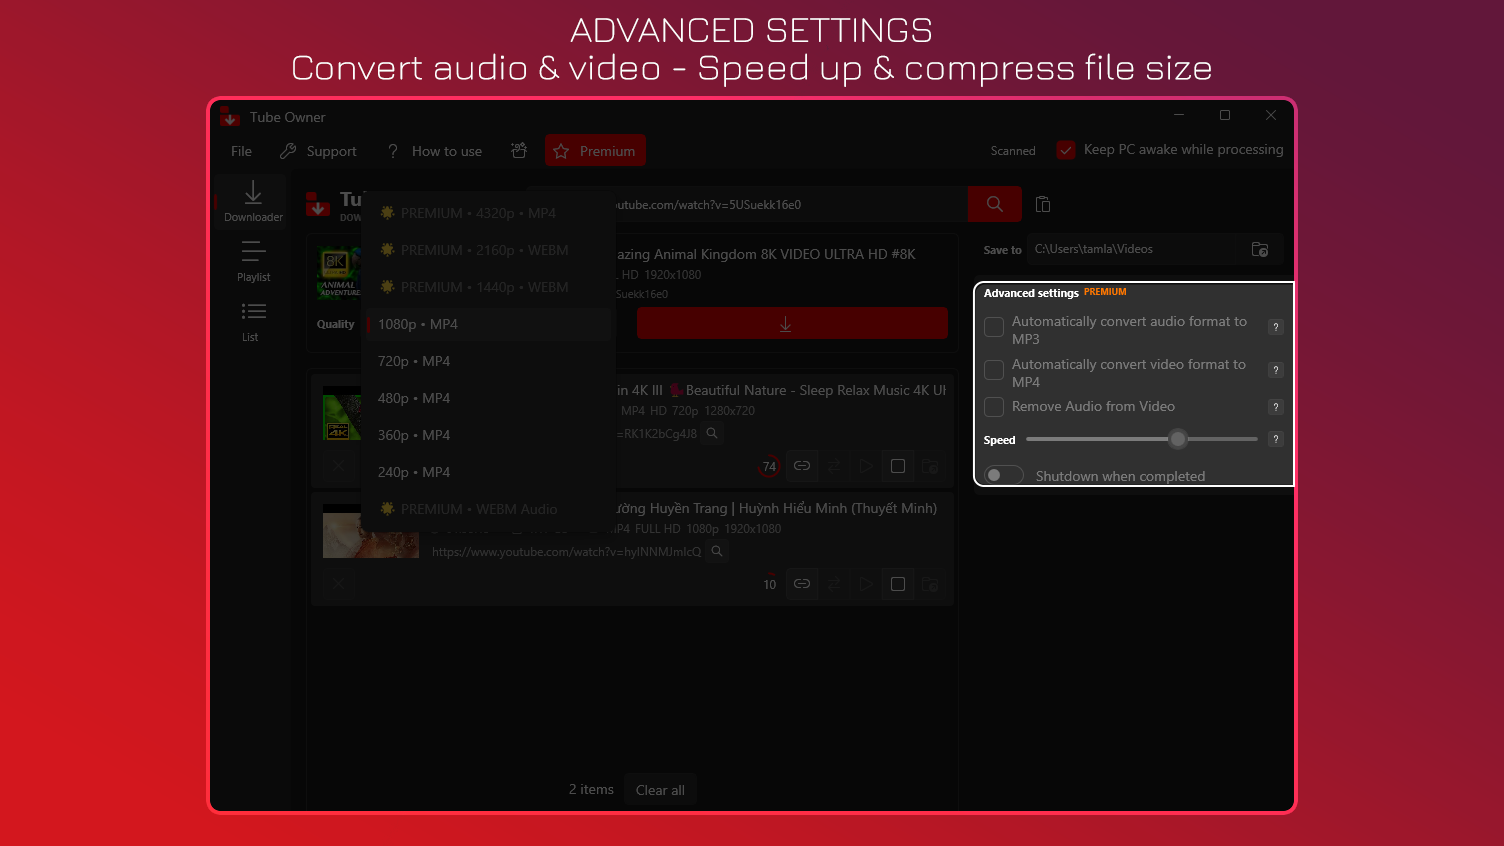 Advanced Settings - Convert audio & video - Speed up & compress file size